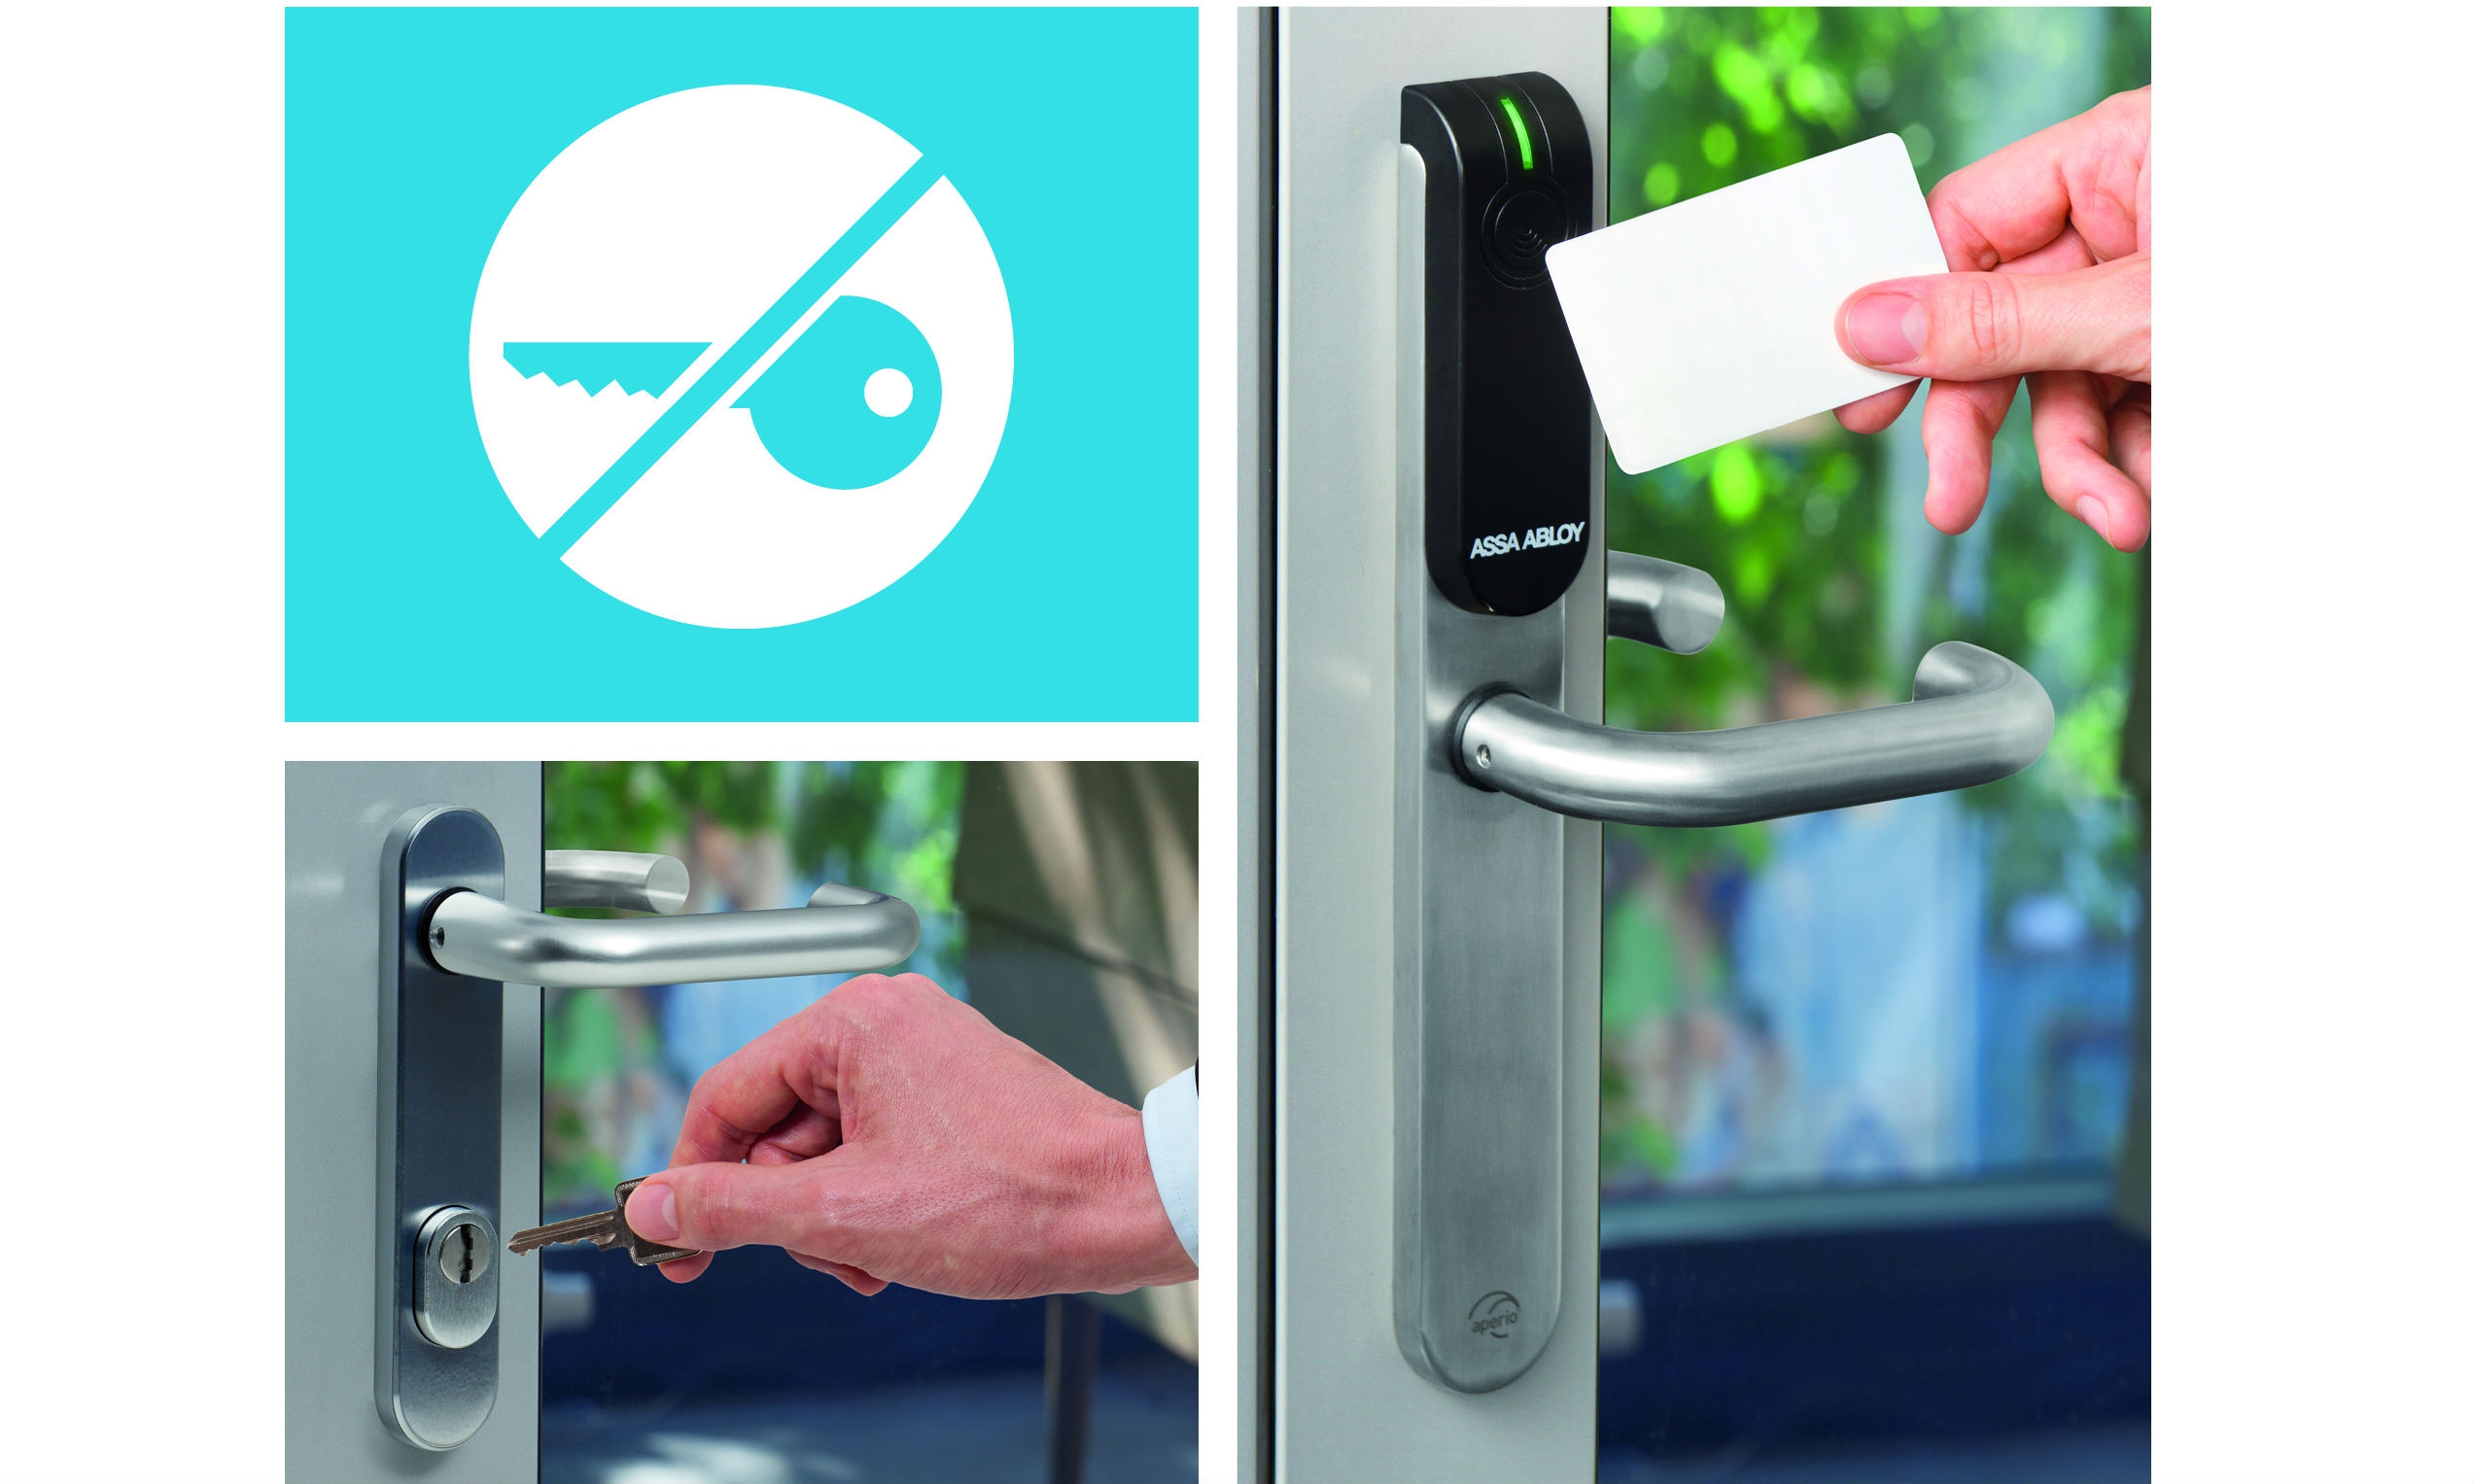 Aperio® enables cost effective expansions of access control systems made by any manufacturer